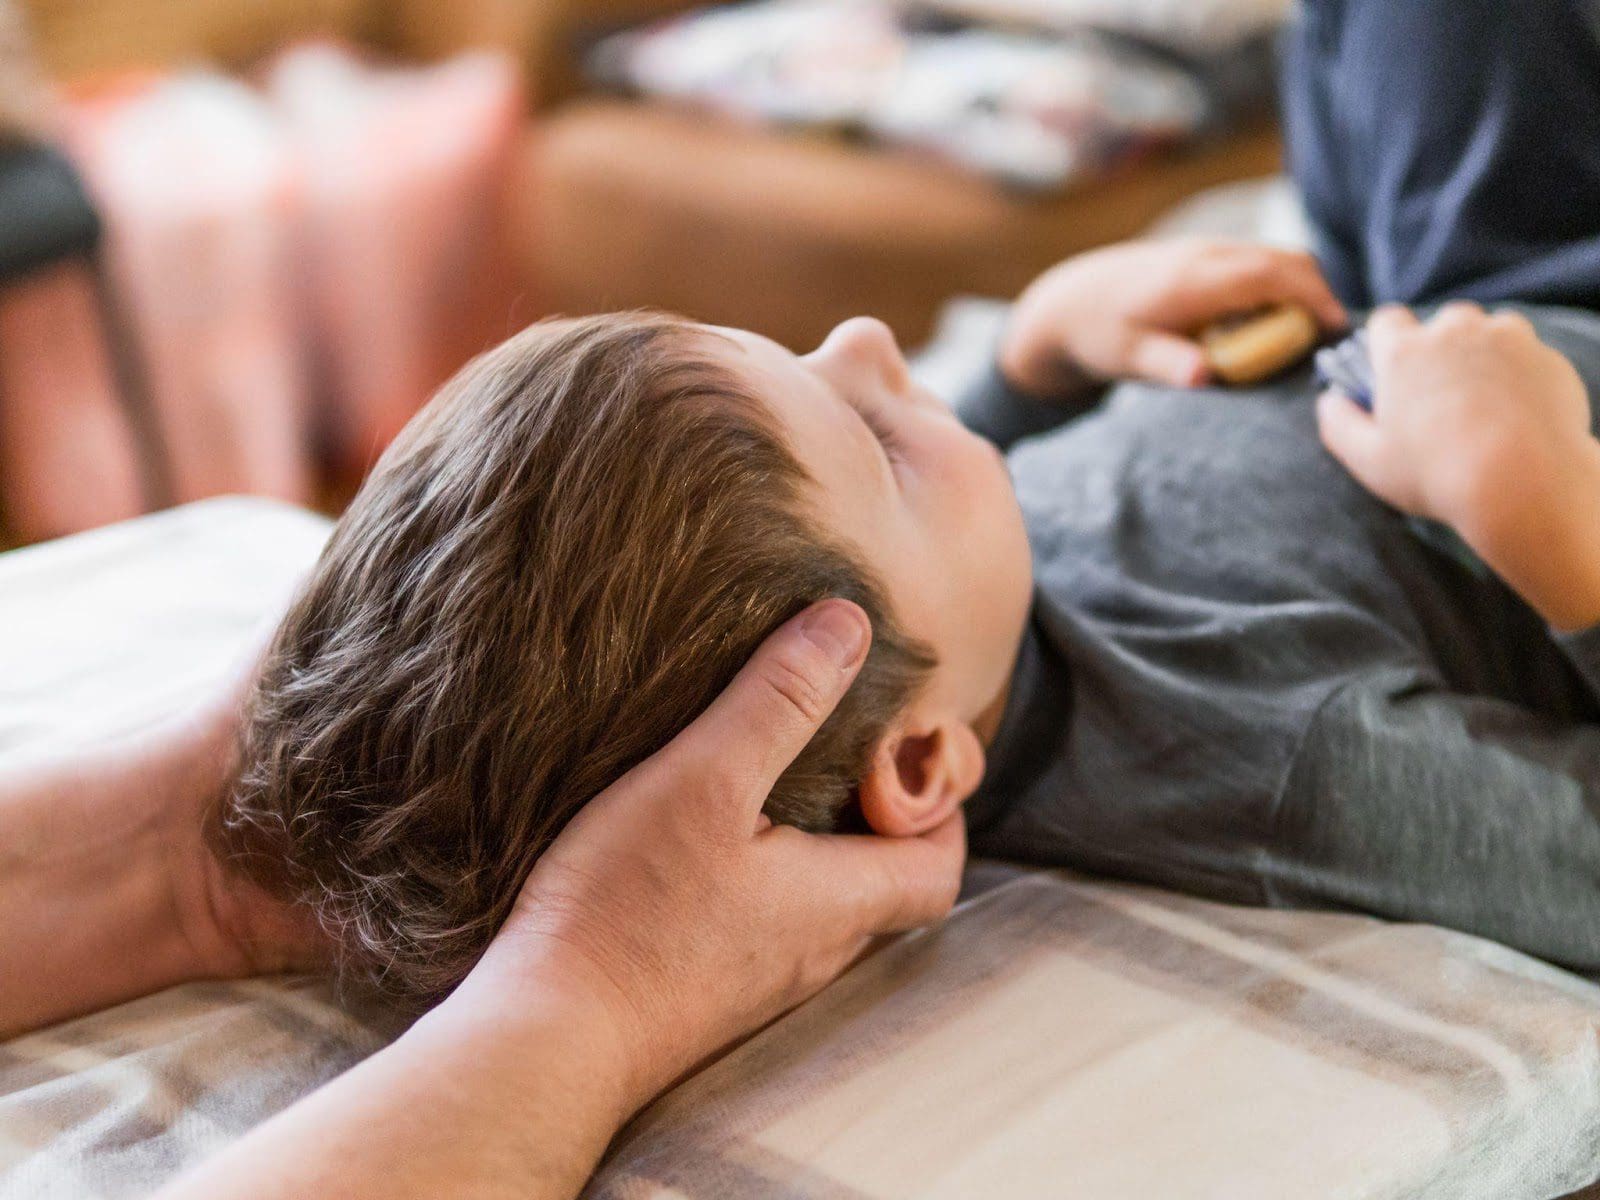 pediatric chiropractor performing a gentle spinal adjustment on a young boy.